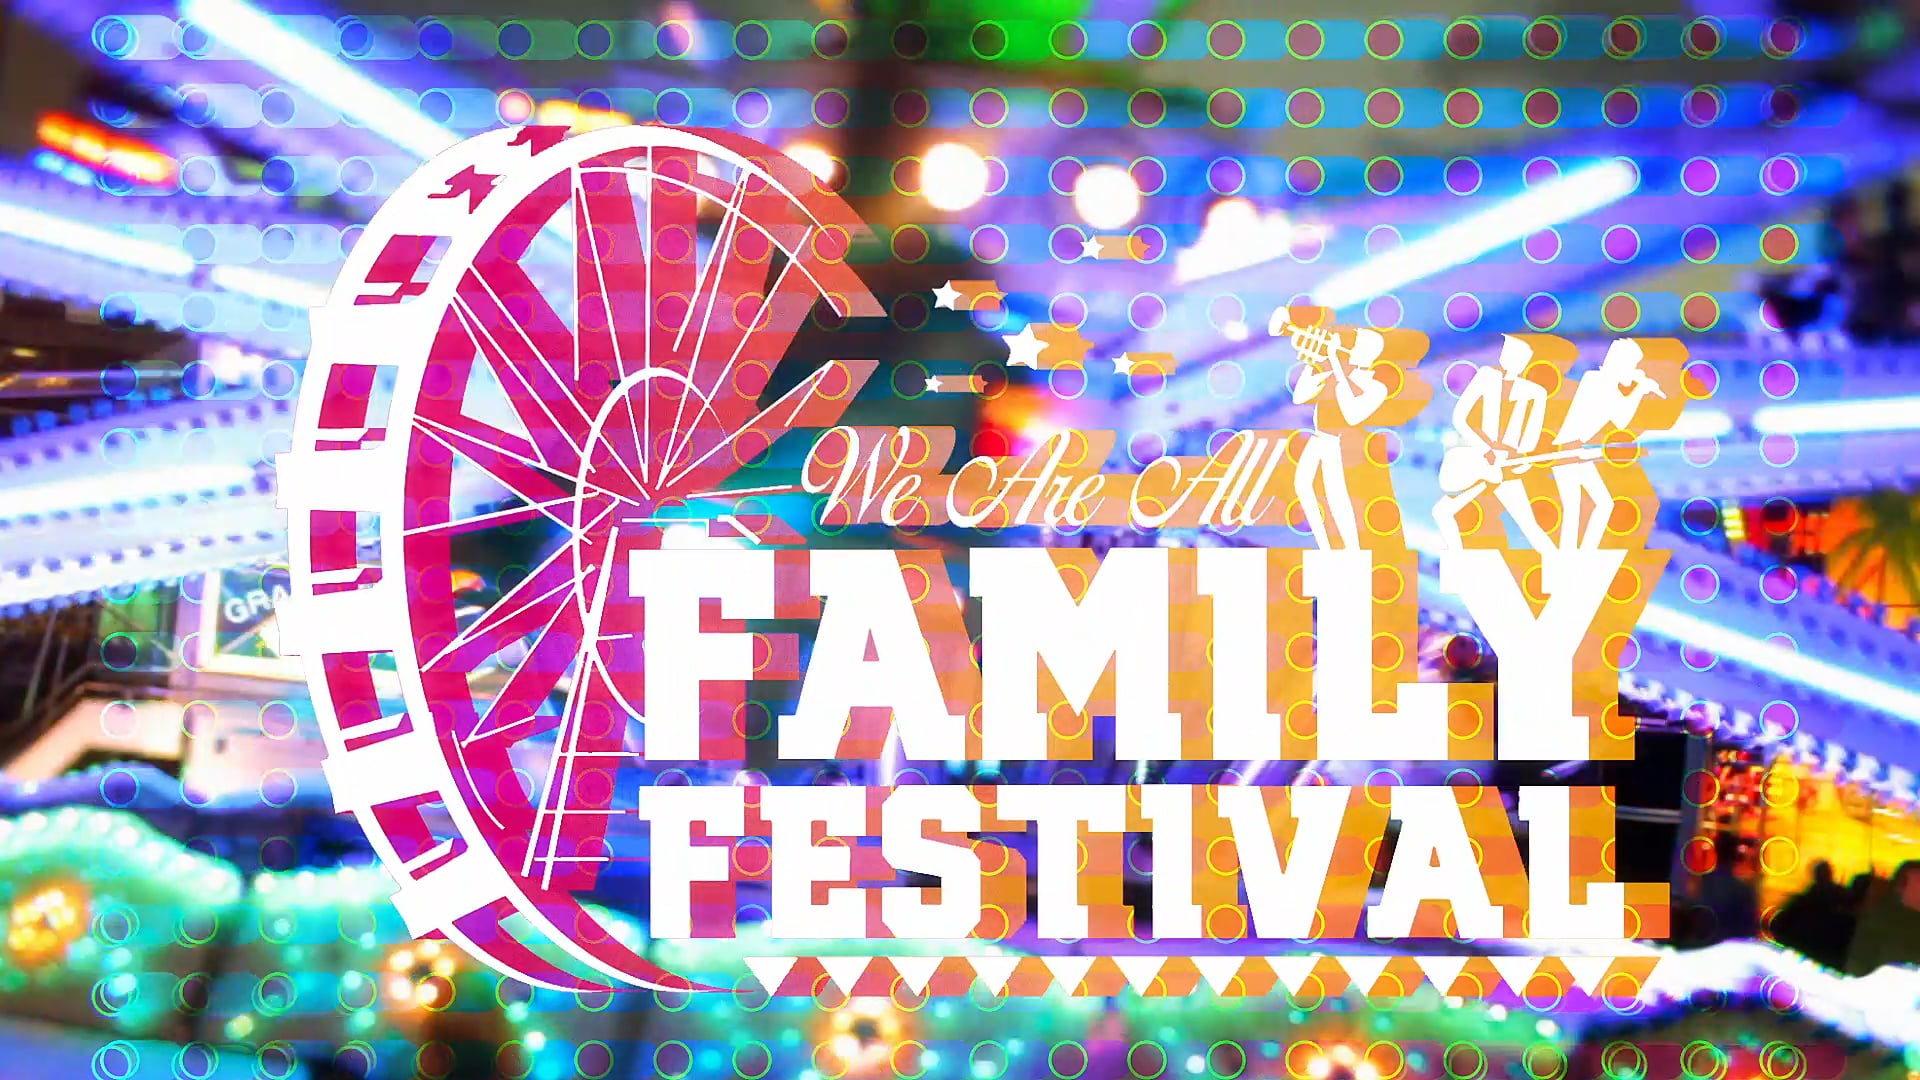 We Are All Family Festival